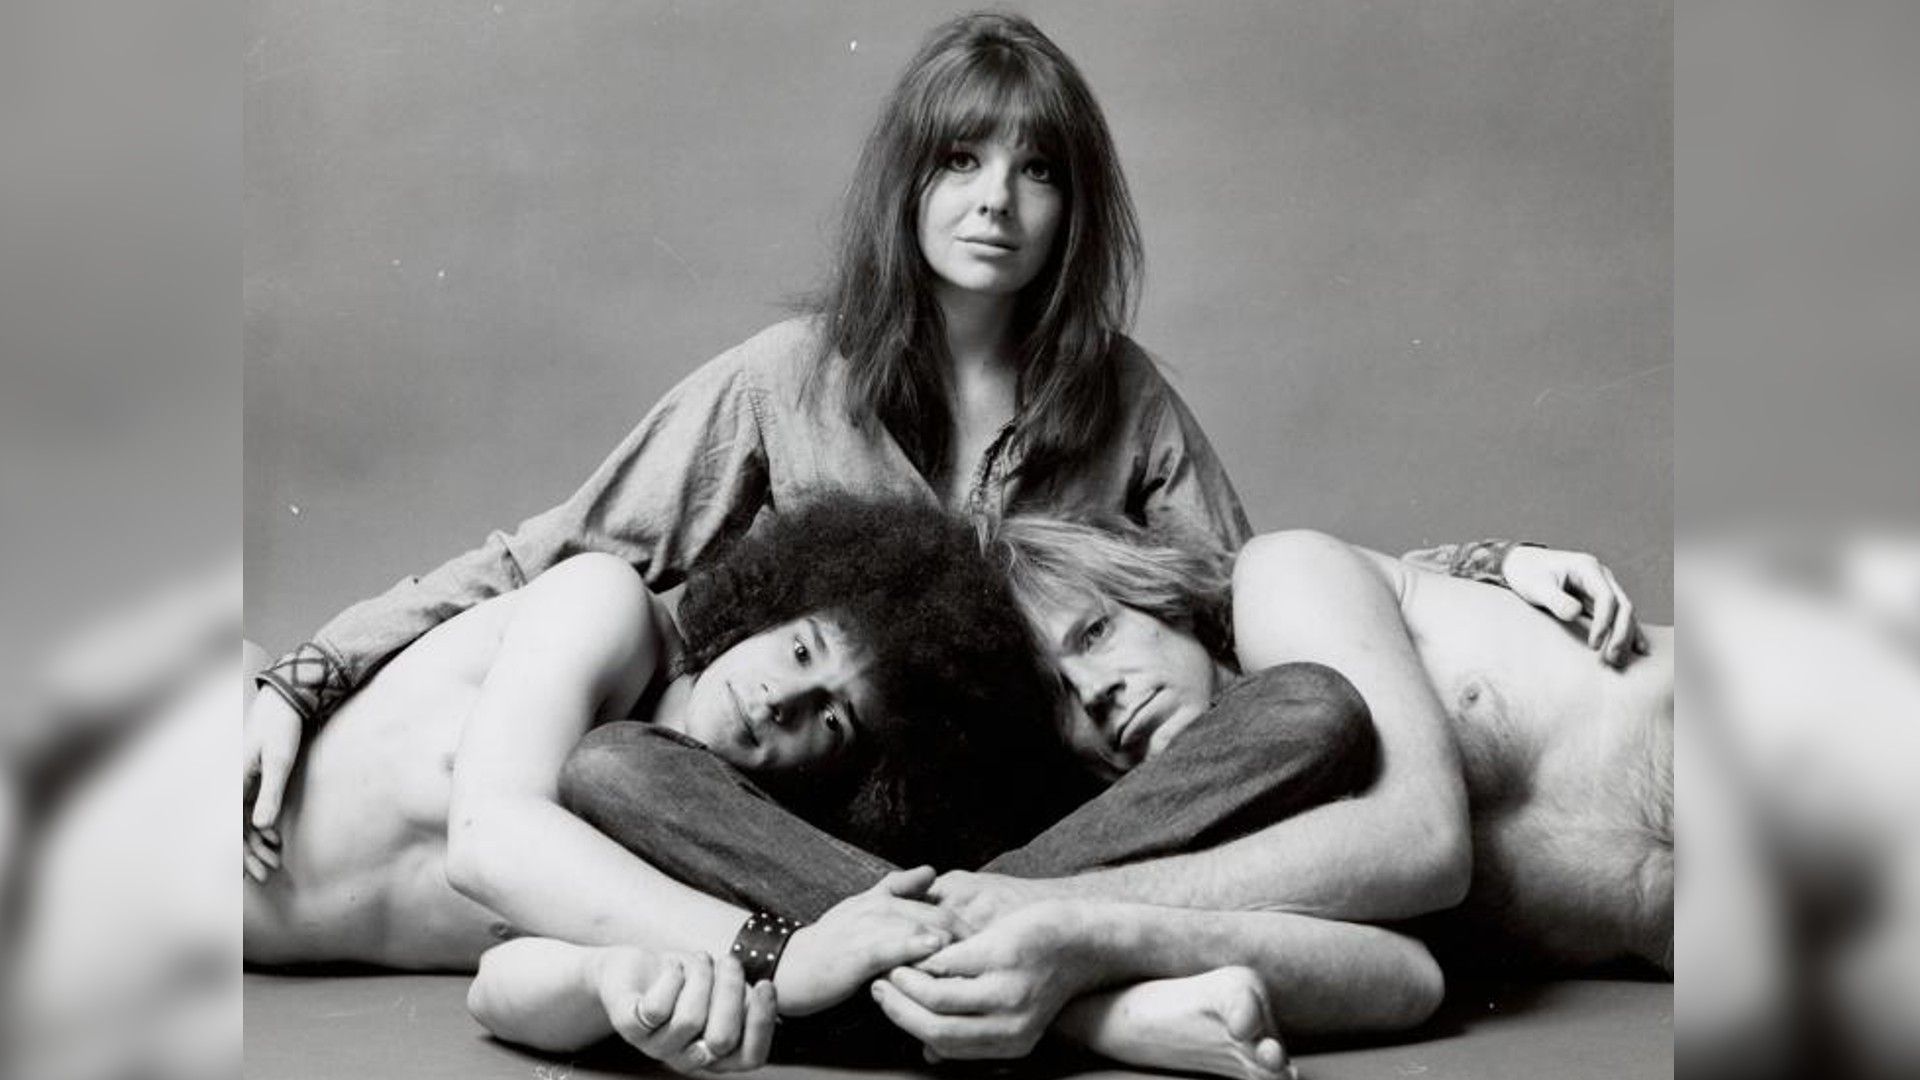 Diane Keaton, Barry McGuire, and Steve Curry (Hair)